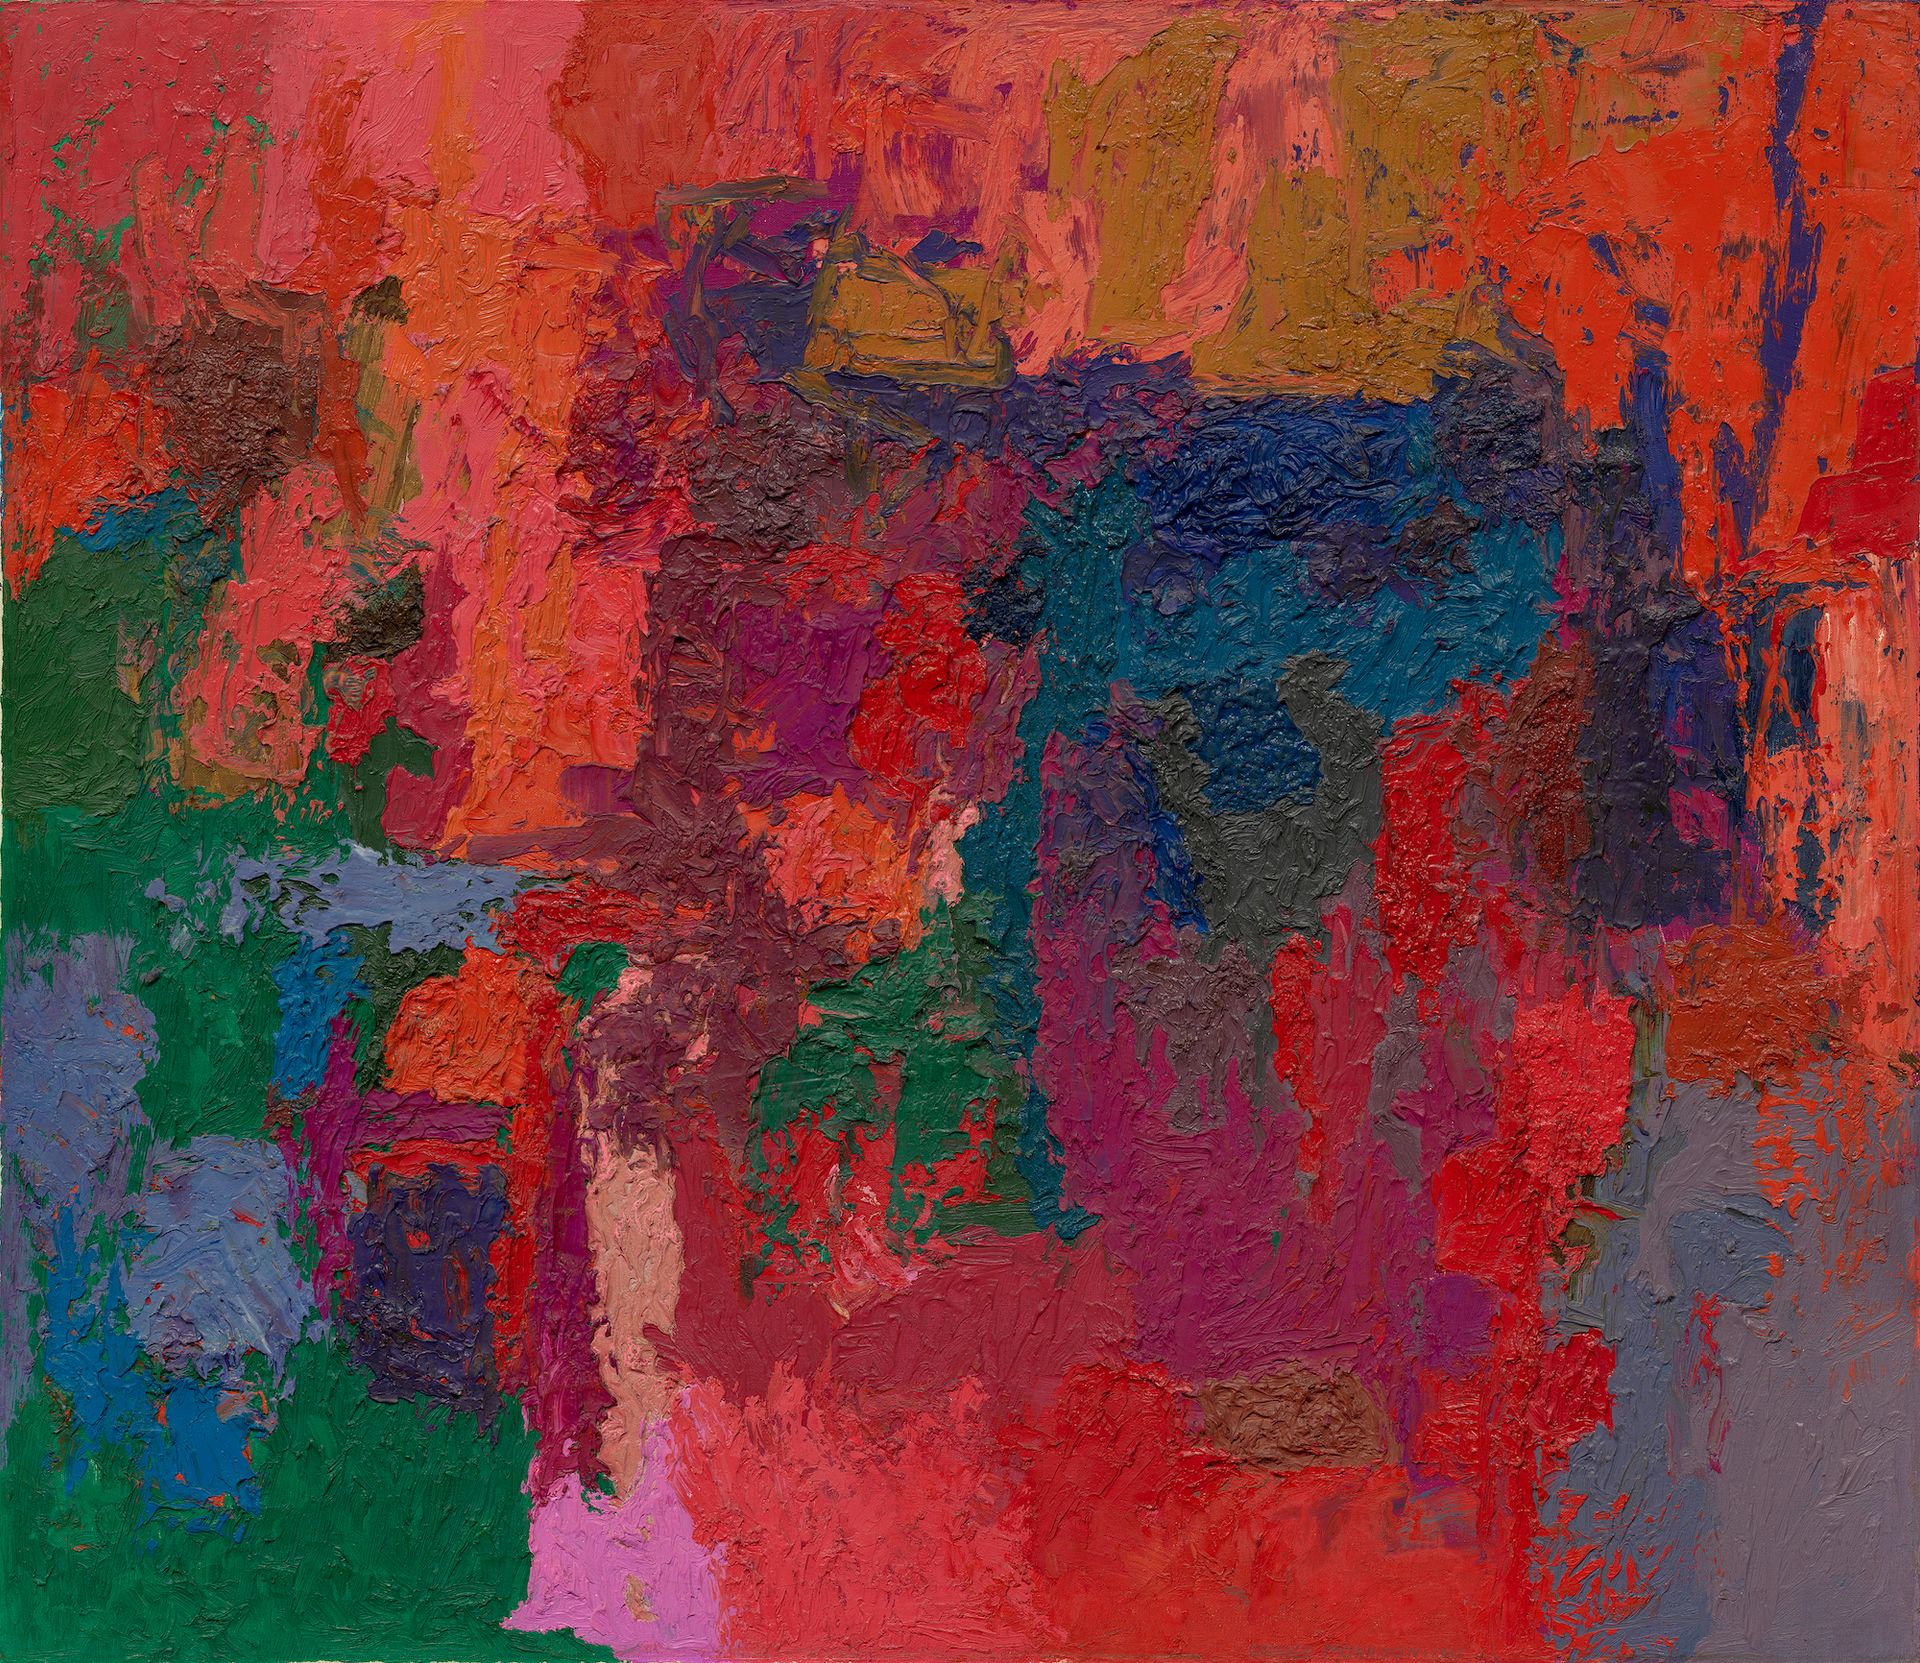 George Morrison, Untitled, 1961. National Gallery of Art, Washington, gift of funds from David M. Rubenstein. Courtesy National Gallery of Art, Washington, DC